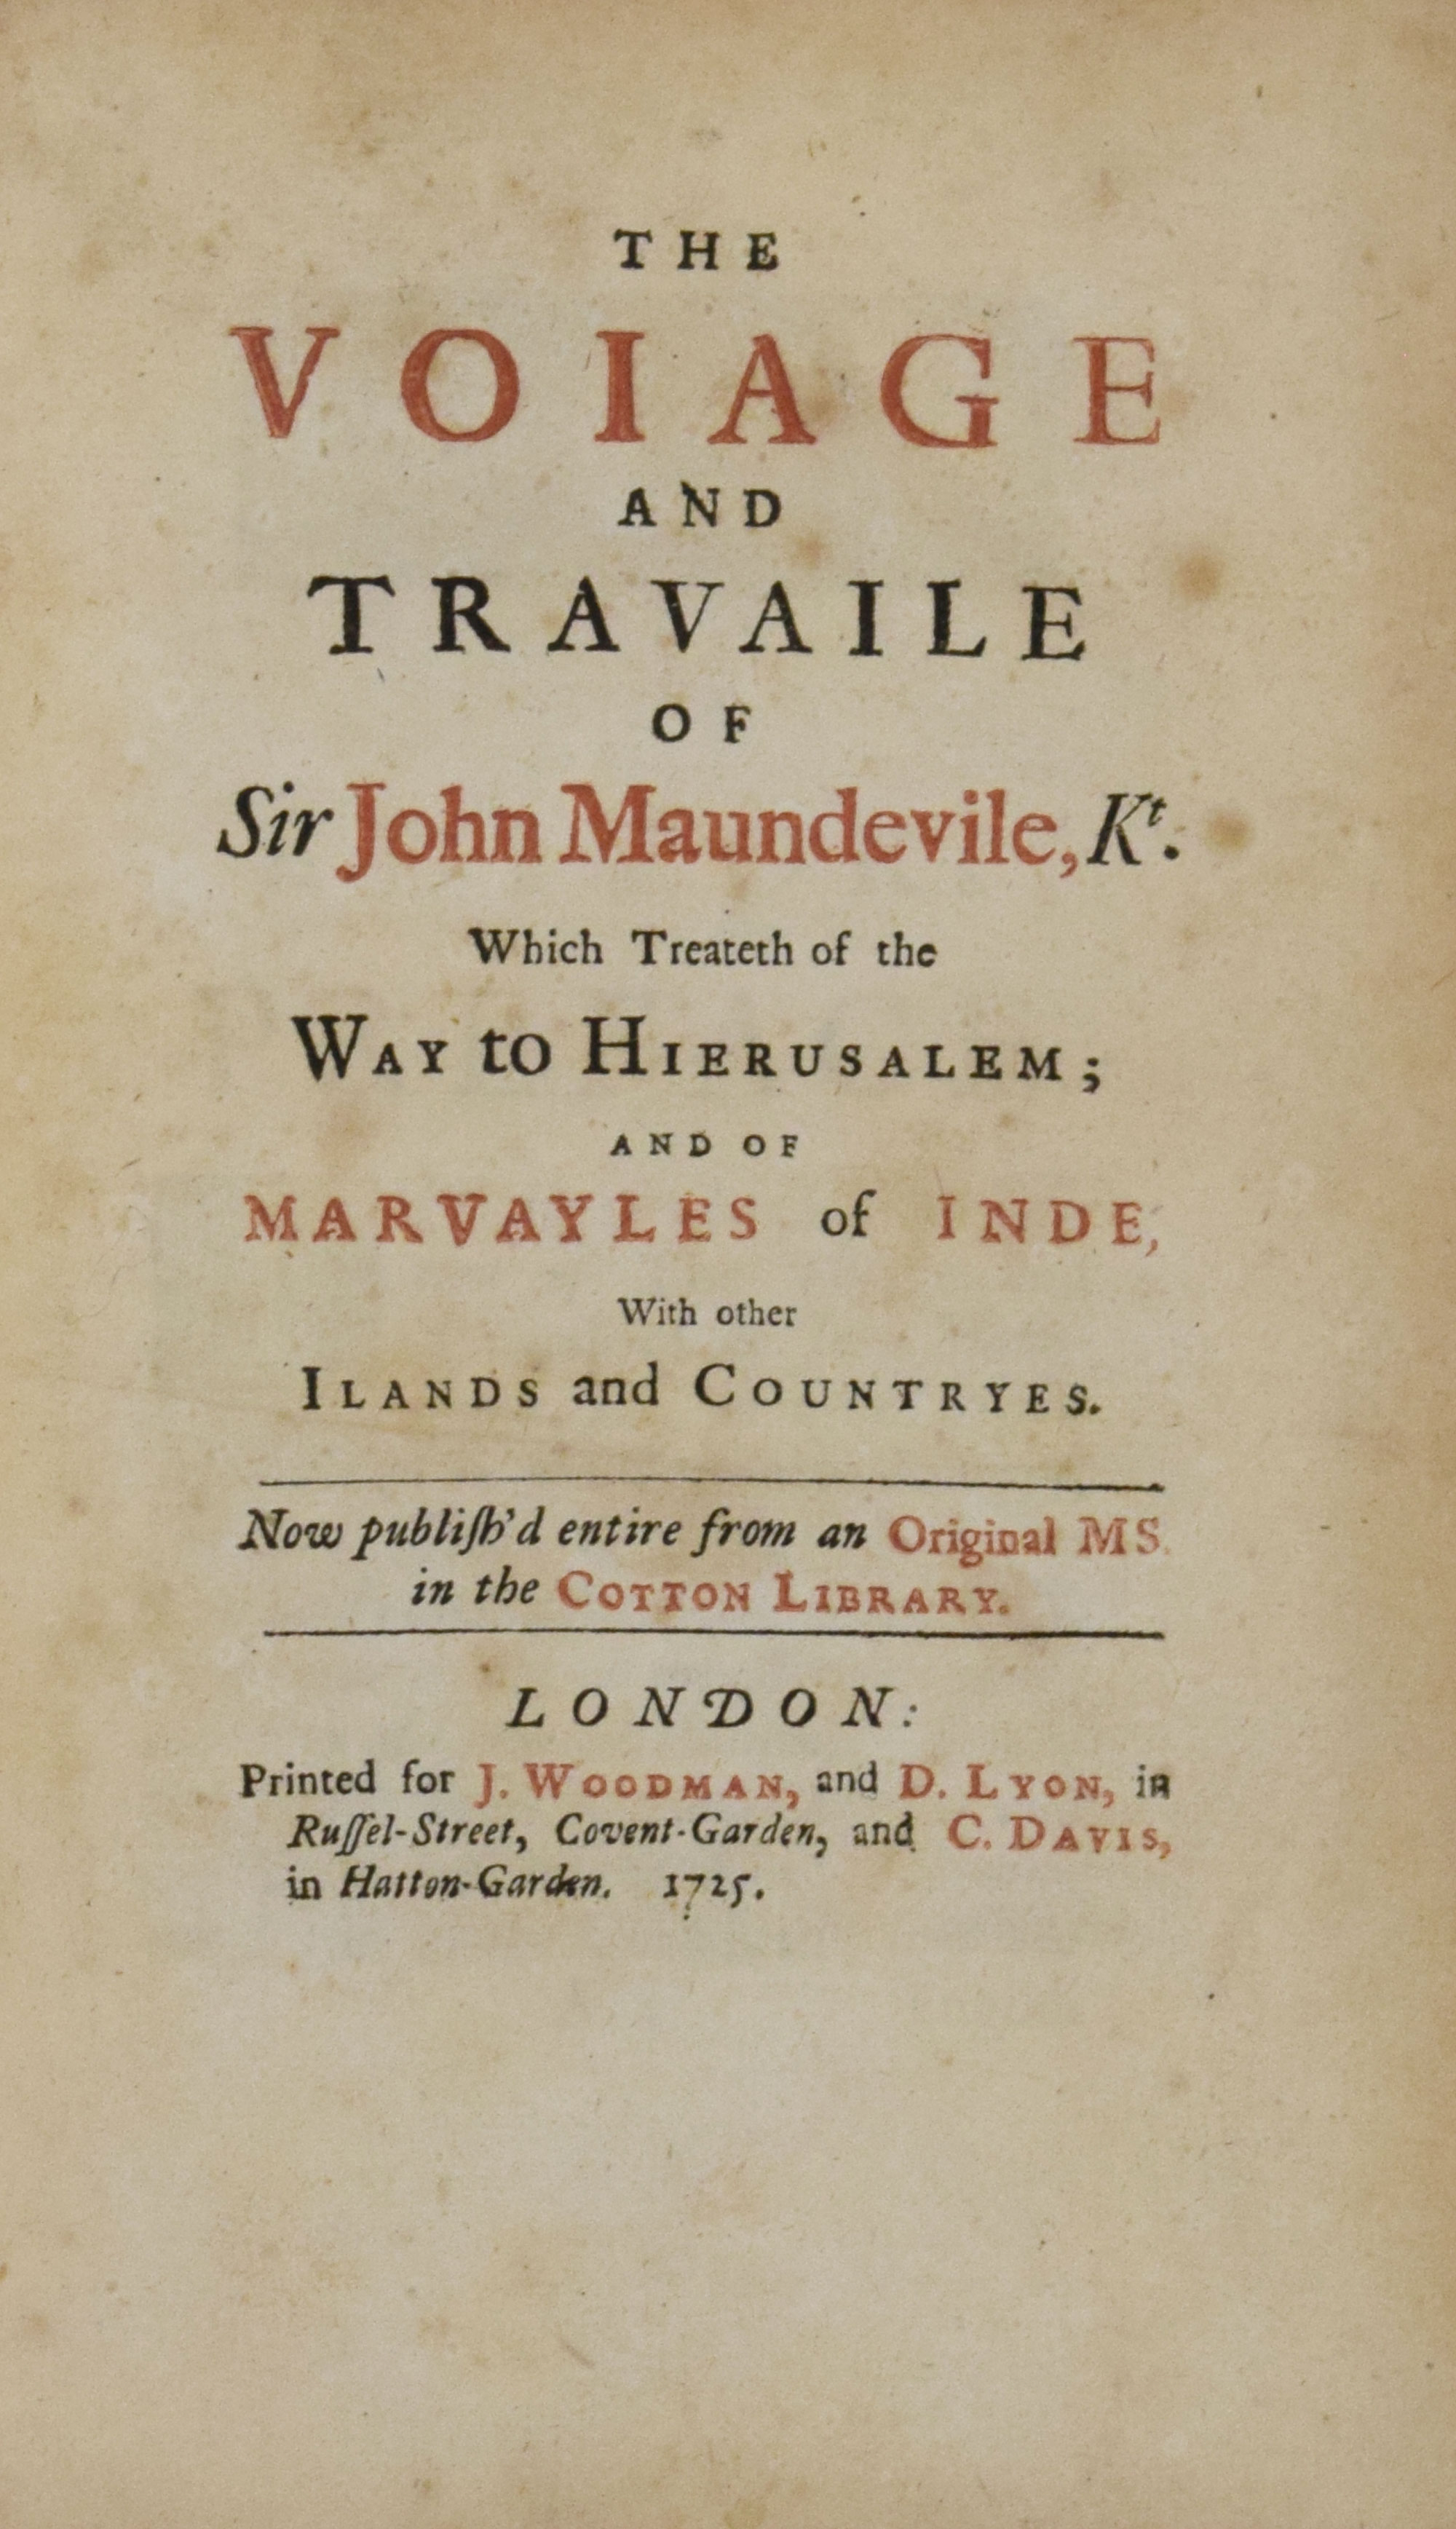 The Voiage and Travaile of Sir John Maundevile Which Treateth of the Way to Hierusalem; and of the Marvayles of Indie with Other Ilands and Countryes. [The Voyage and Travels of Sir John Mandeville]